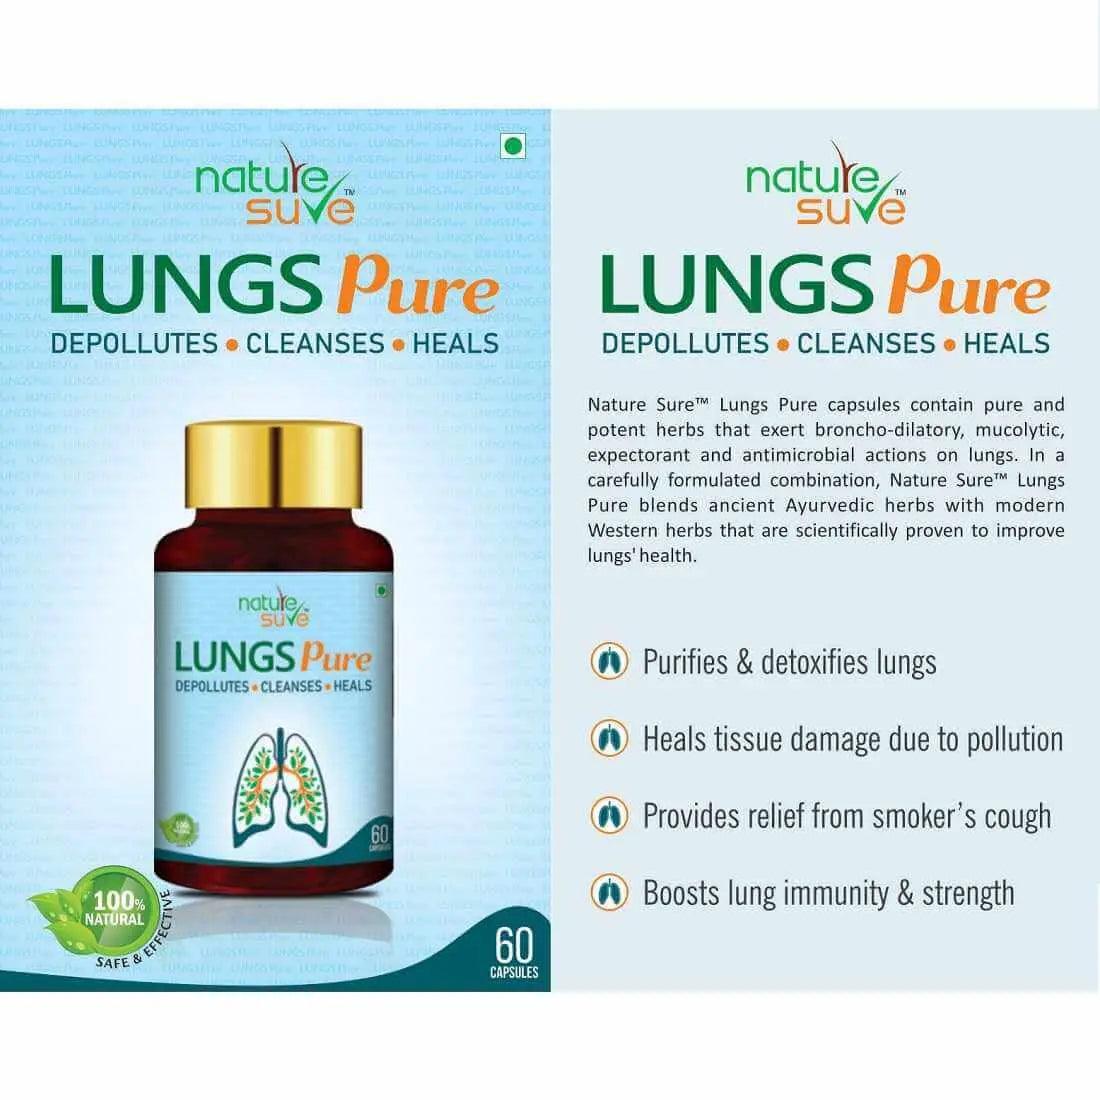 Nature Sure Lungs Pure for Protection Against Pollution, Smoke & Respiratory Health Problems - 60 Capsules